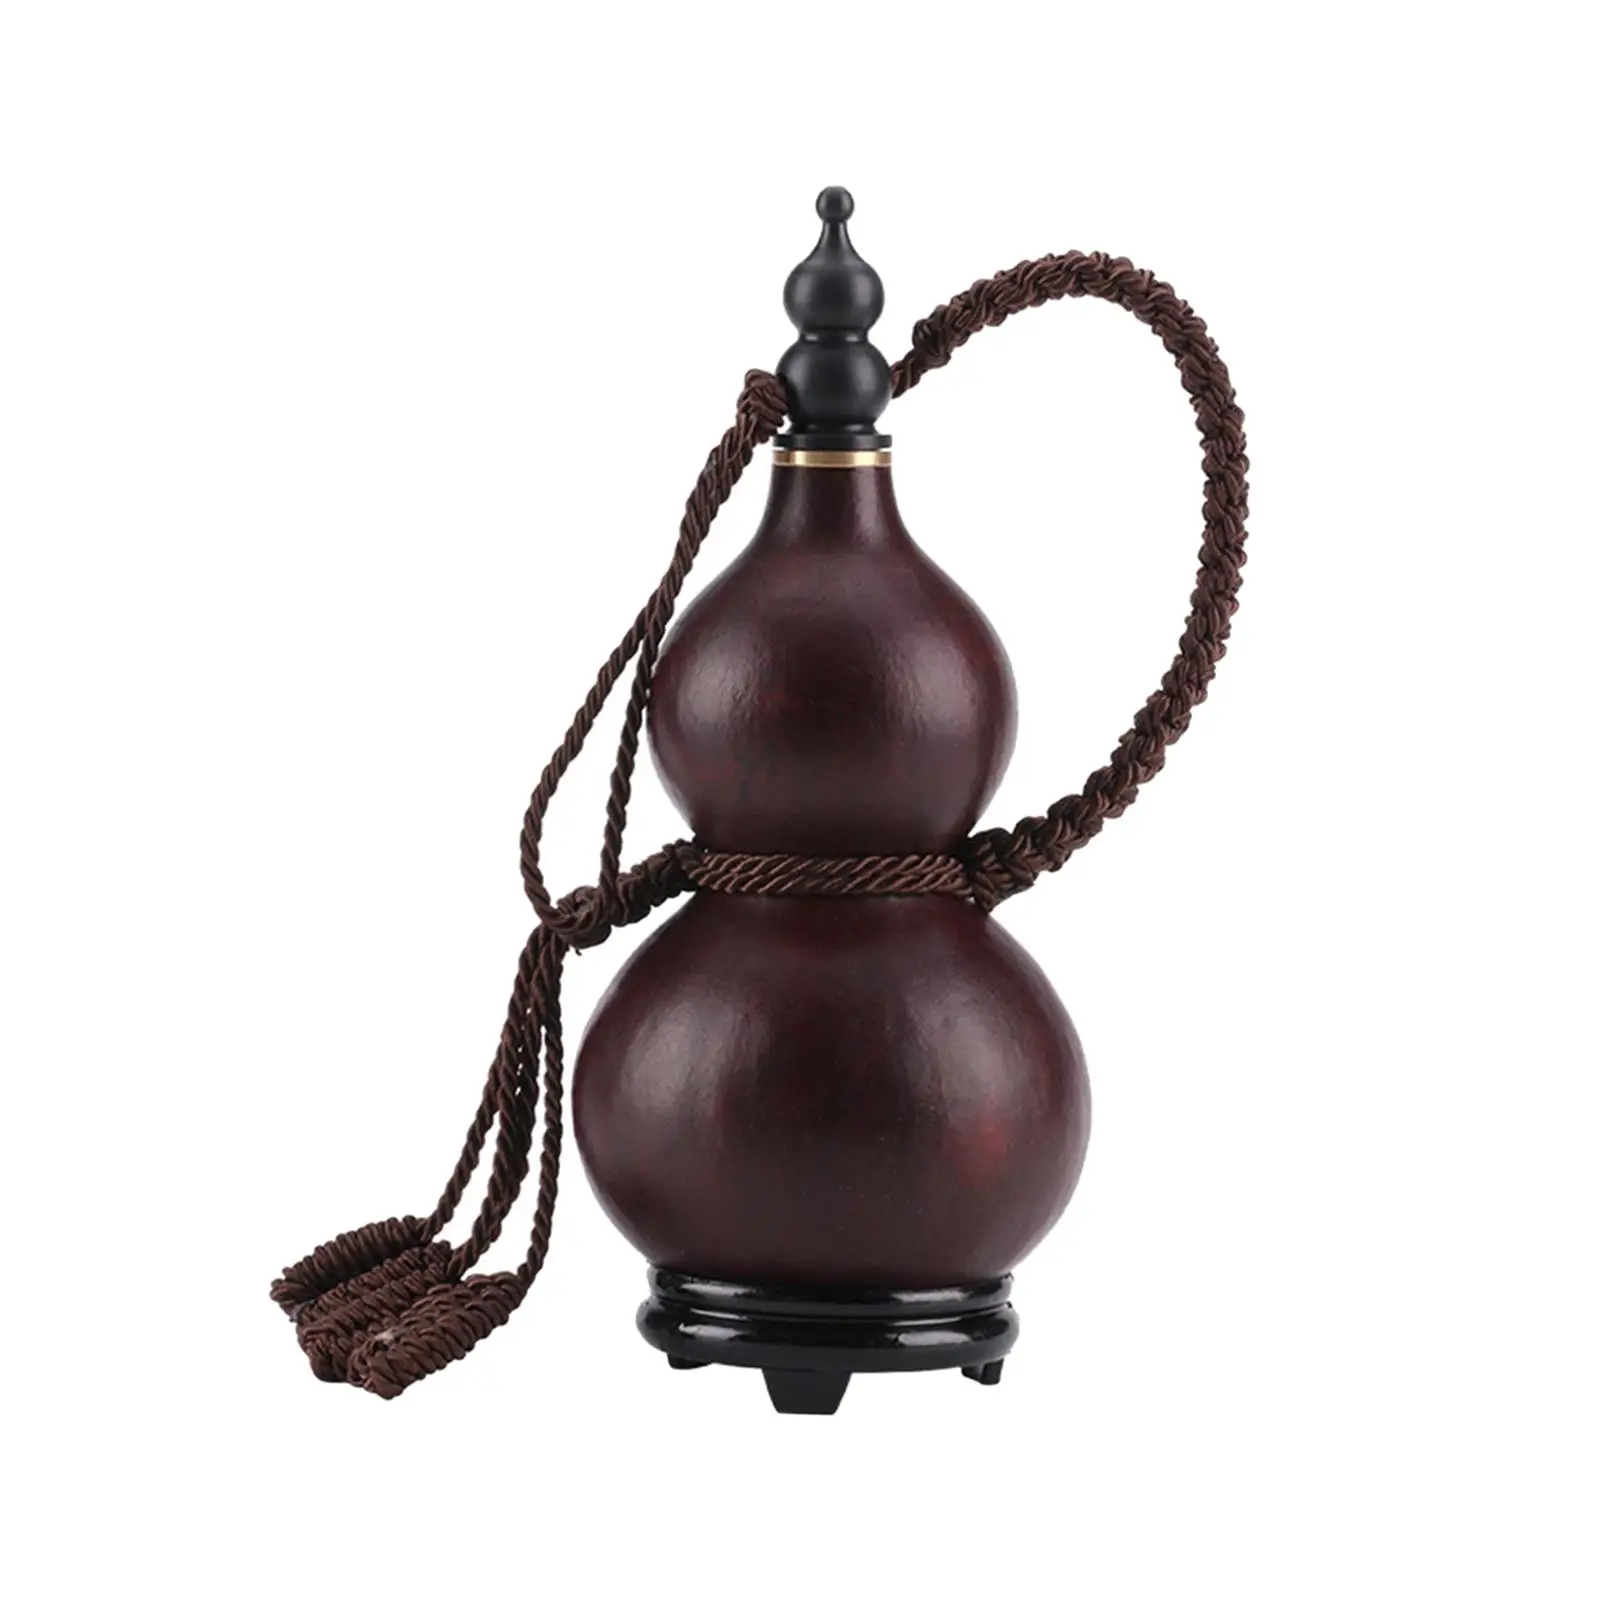 Gourd Water Bottle with Lid Hollow Calabash Dried Gourd Drinking Bottle for Indoor Camping Drinks Holder Decoration